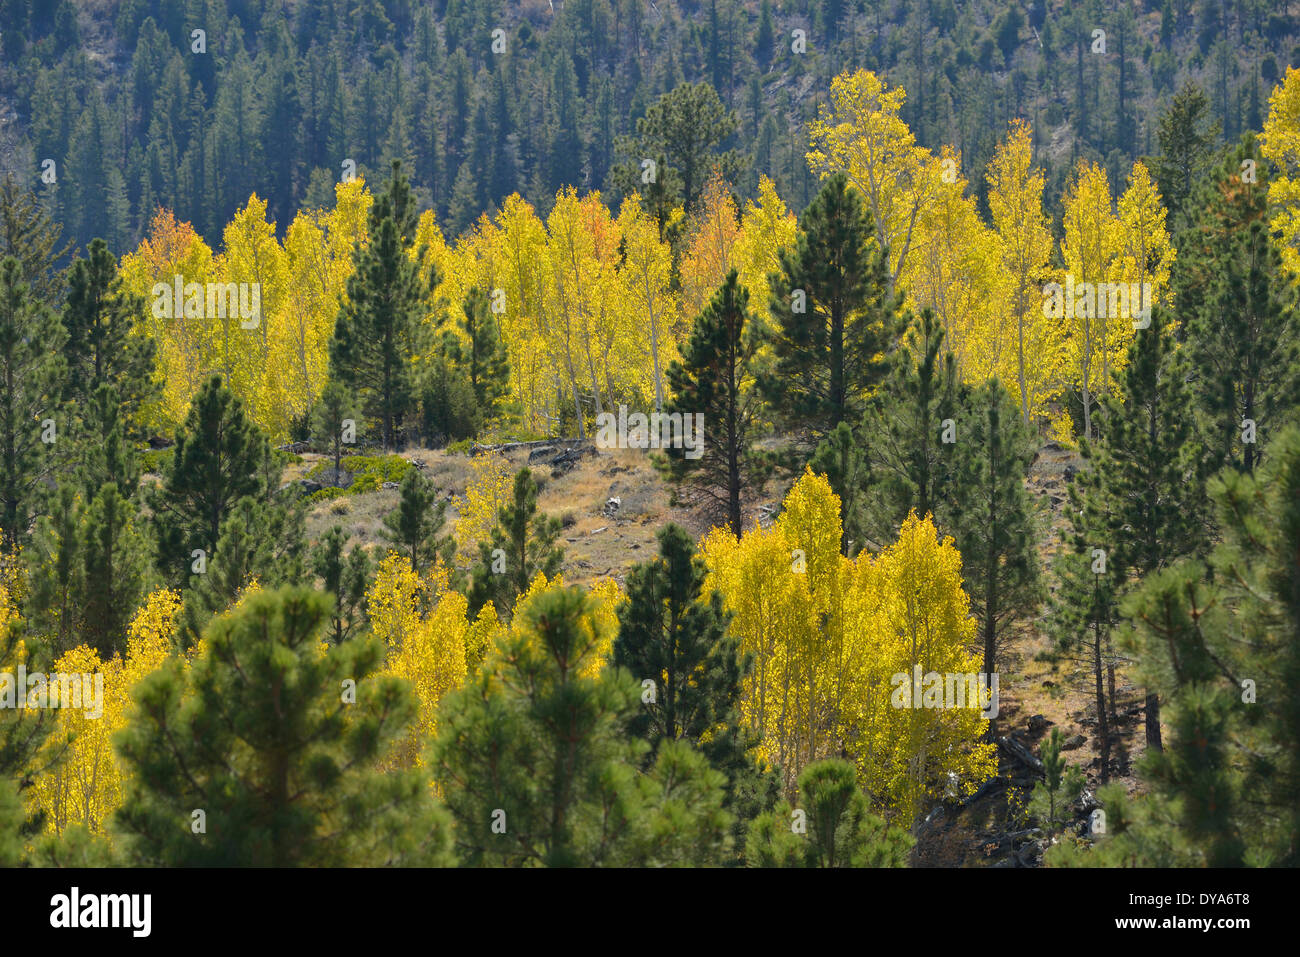 North America, Utah, Colorado Plateau, southern, aspen, foliage, landscape, nature, no people, Dixie, National Forest, forest, Stock Photo